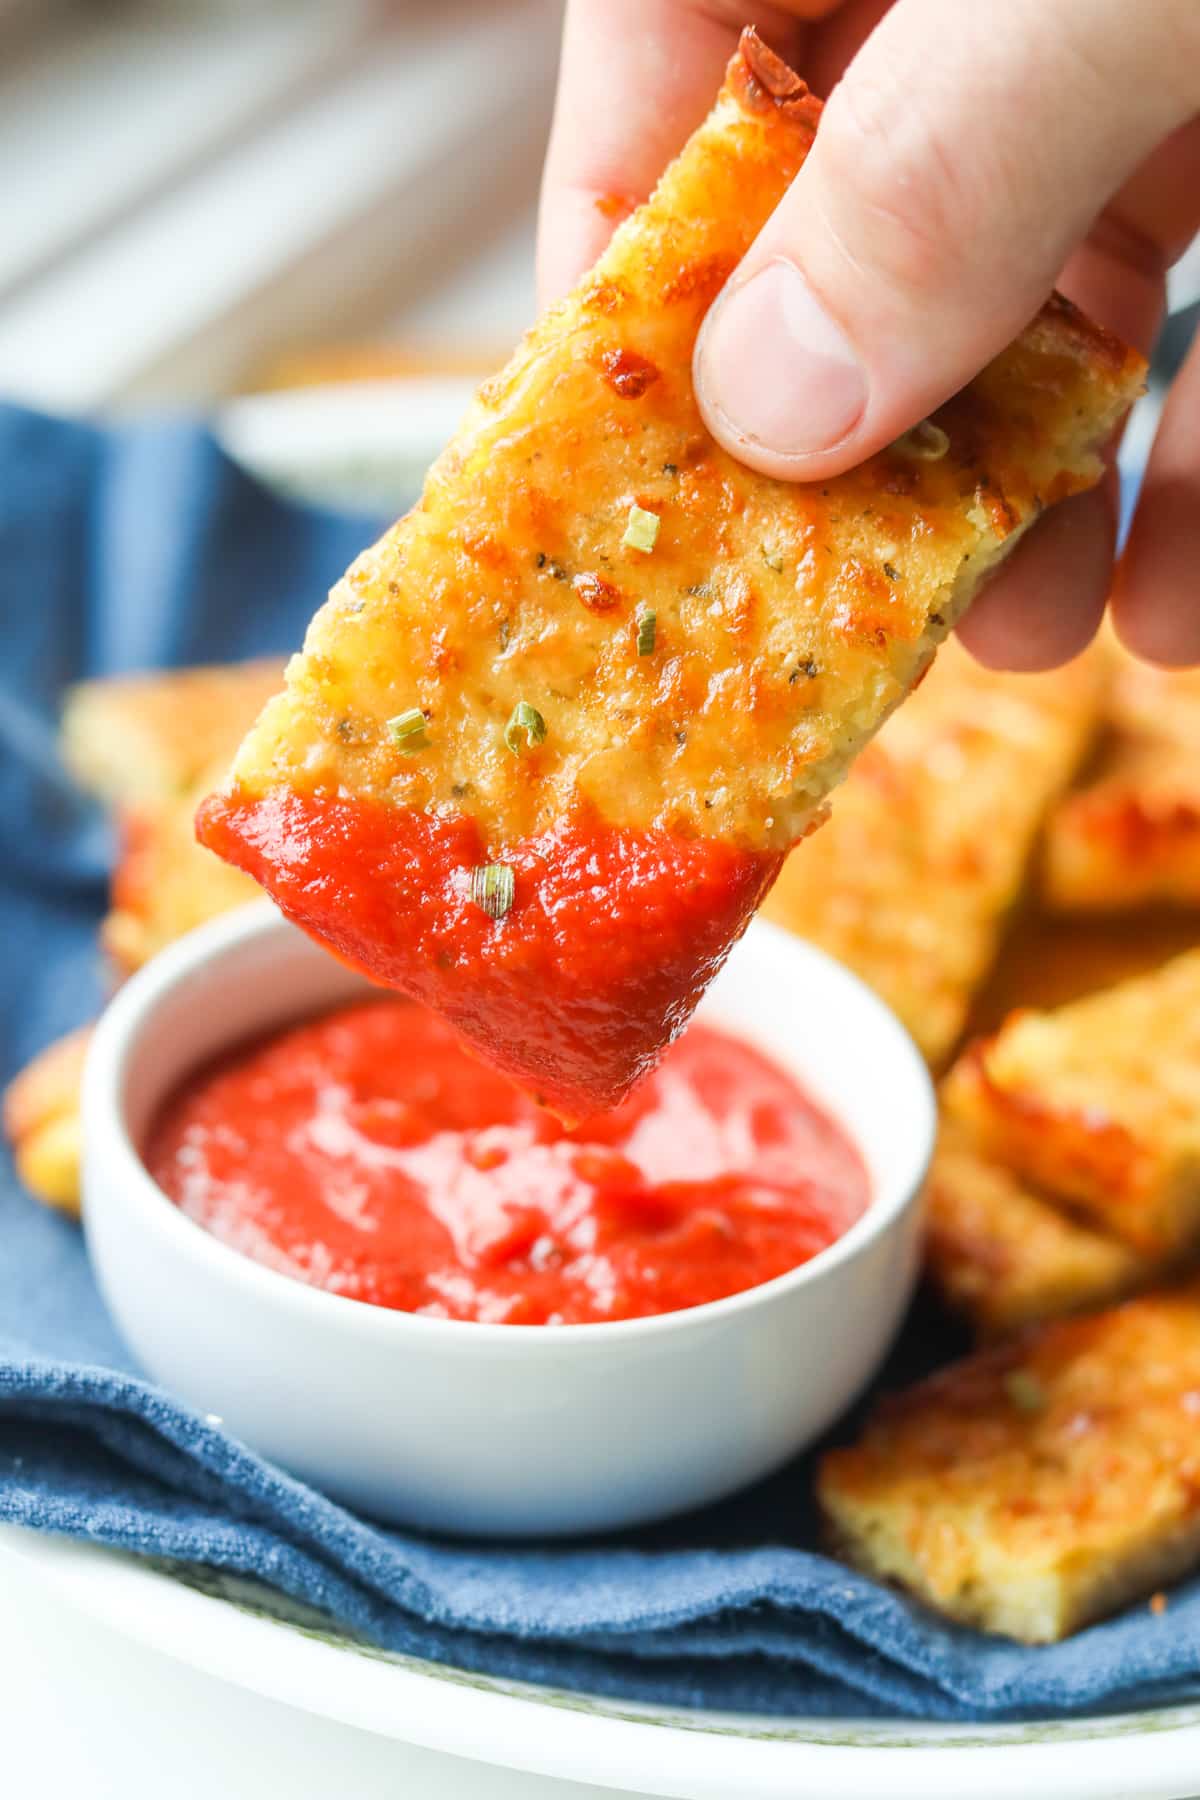 A hand holding a piece of cheese bread that's been dipped in marinara sauce.